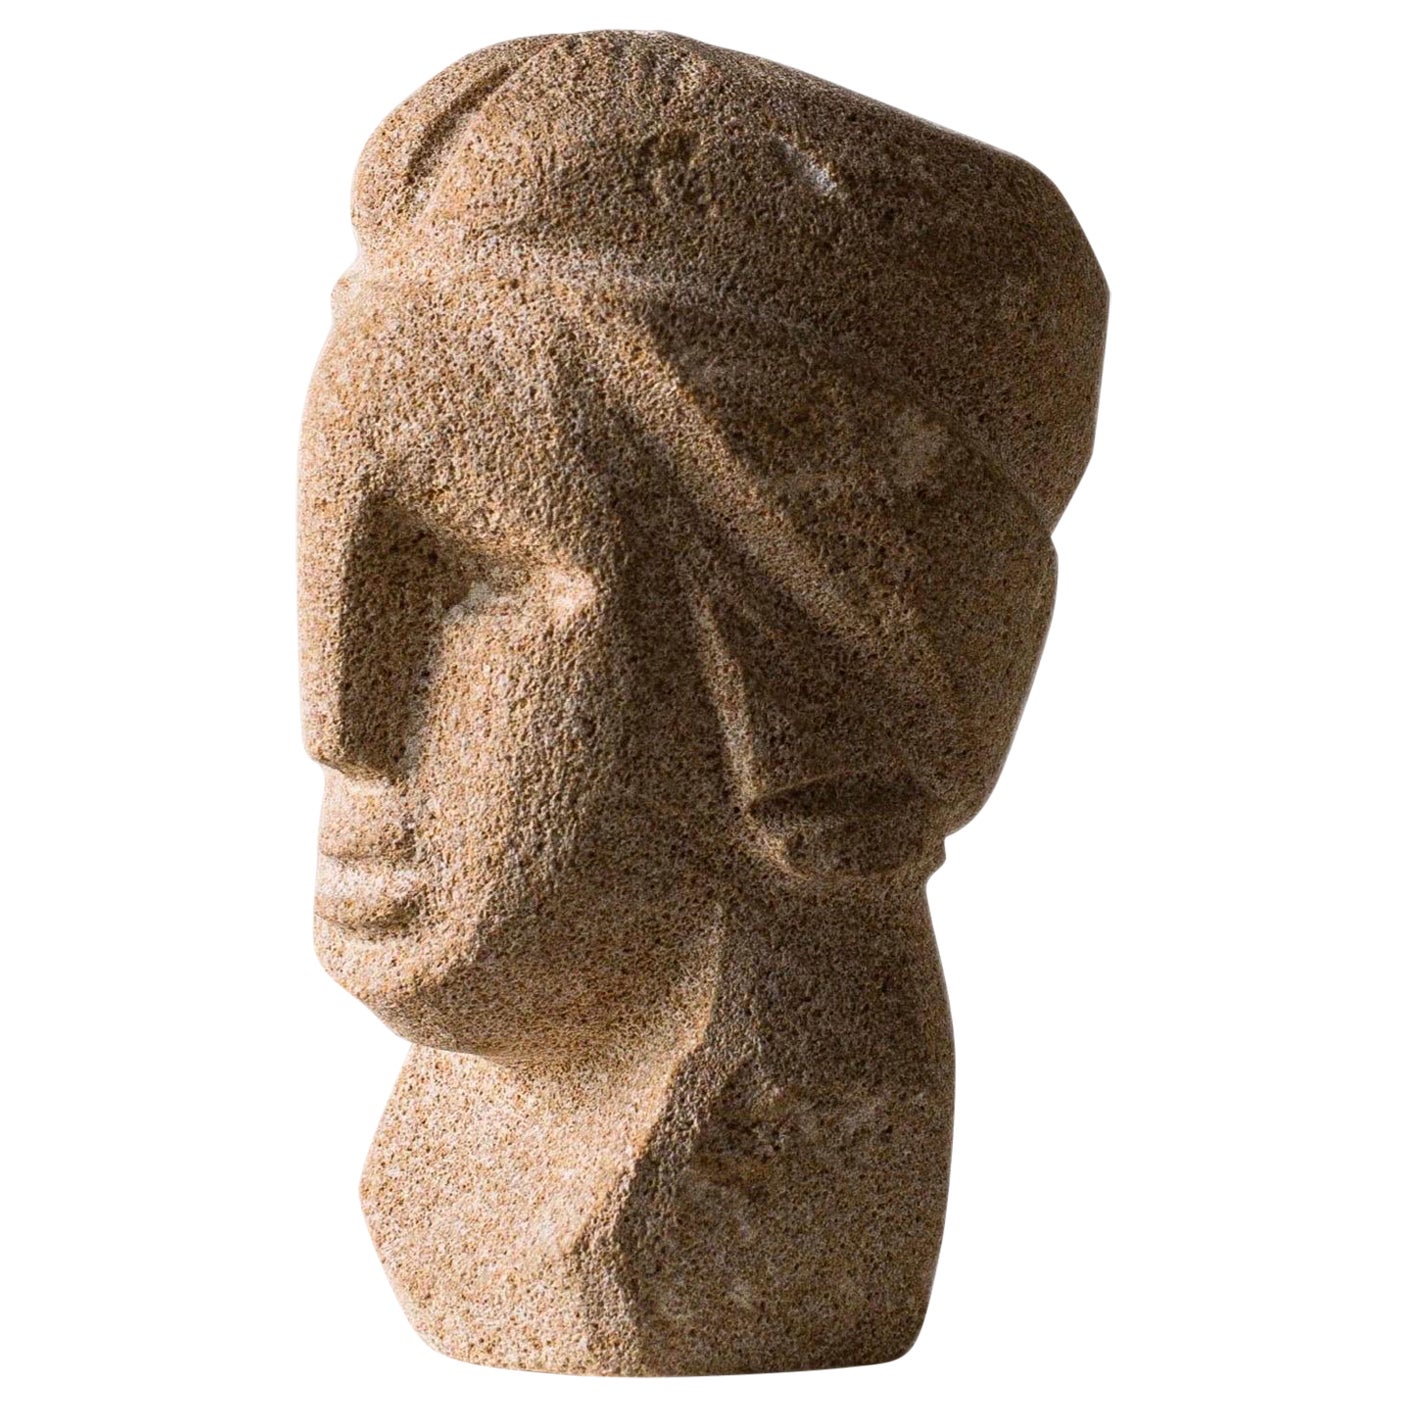 Carved Stone Head Sculpture french work 1970's